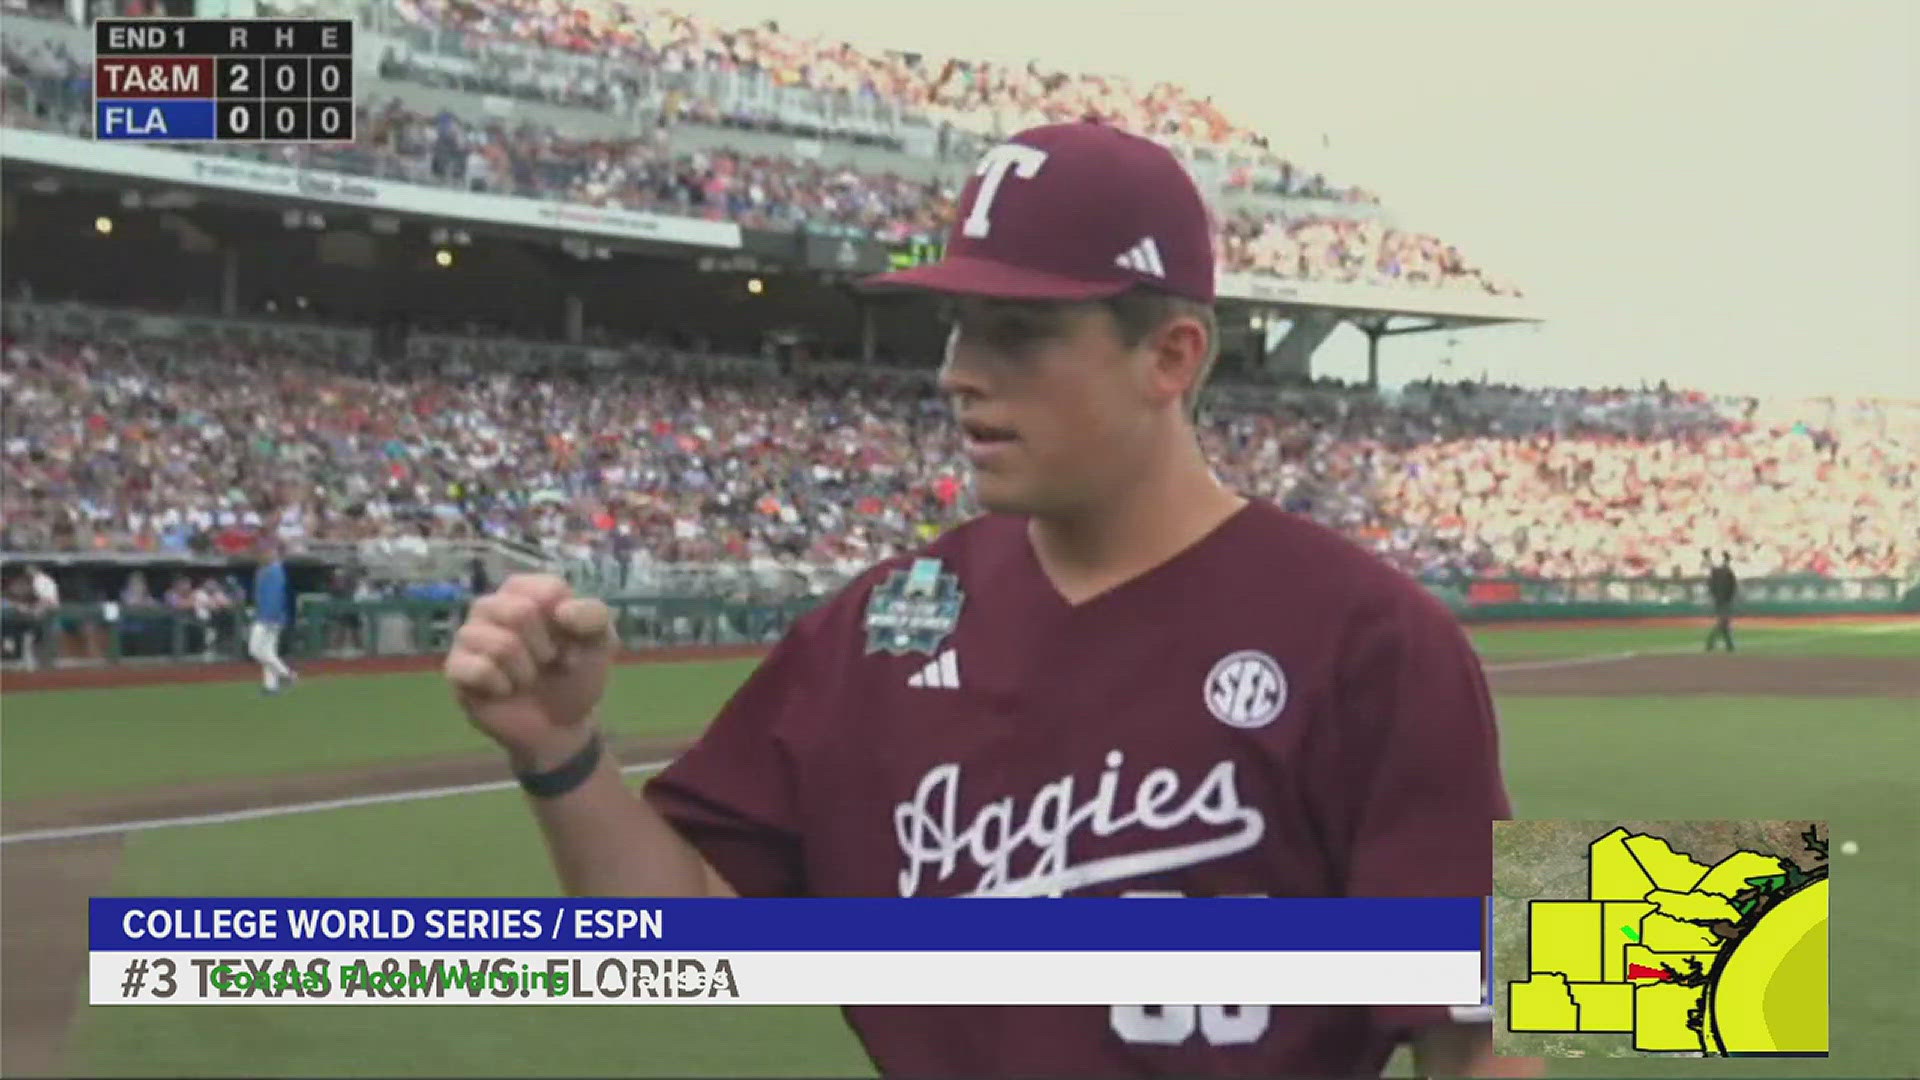 Justin Lamkin threw five shutout innings in a win over the Florida Gators. Footage courtesy ESPN.